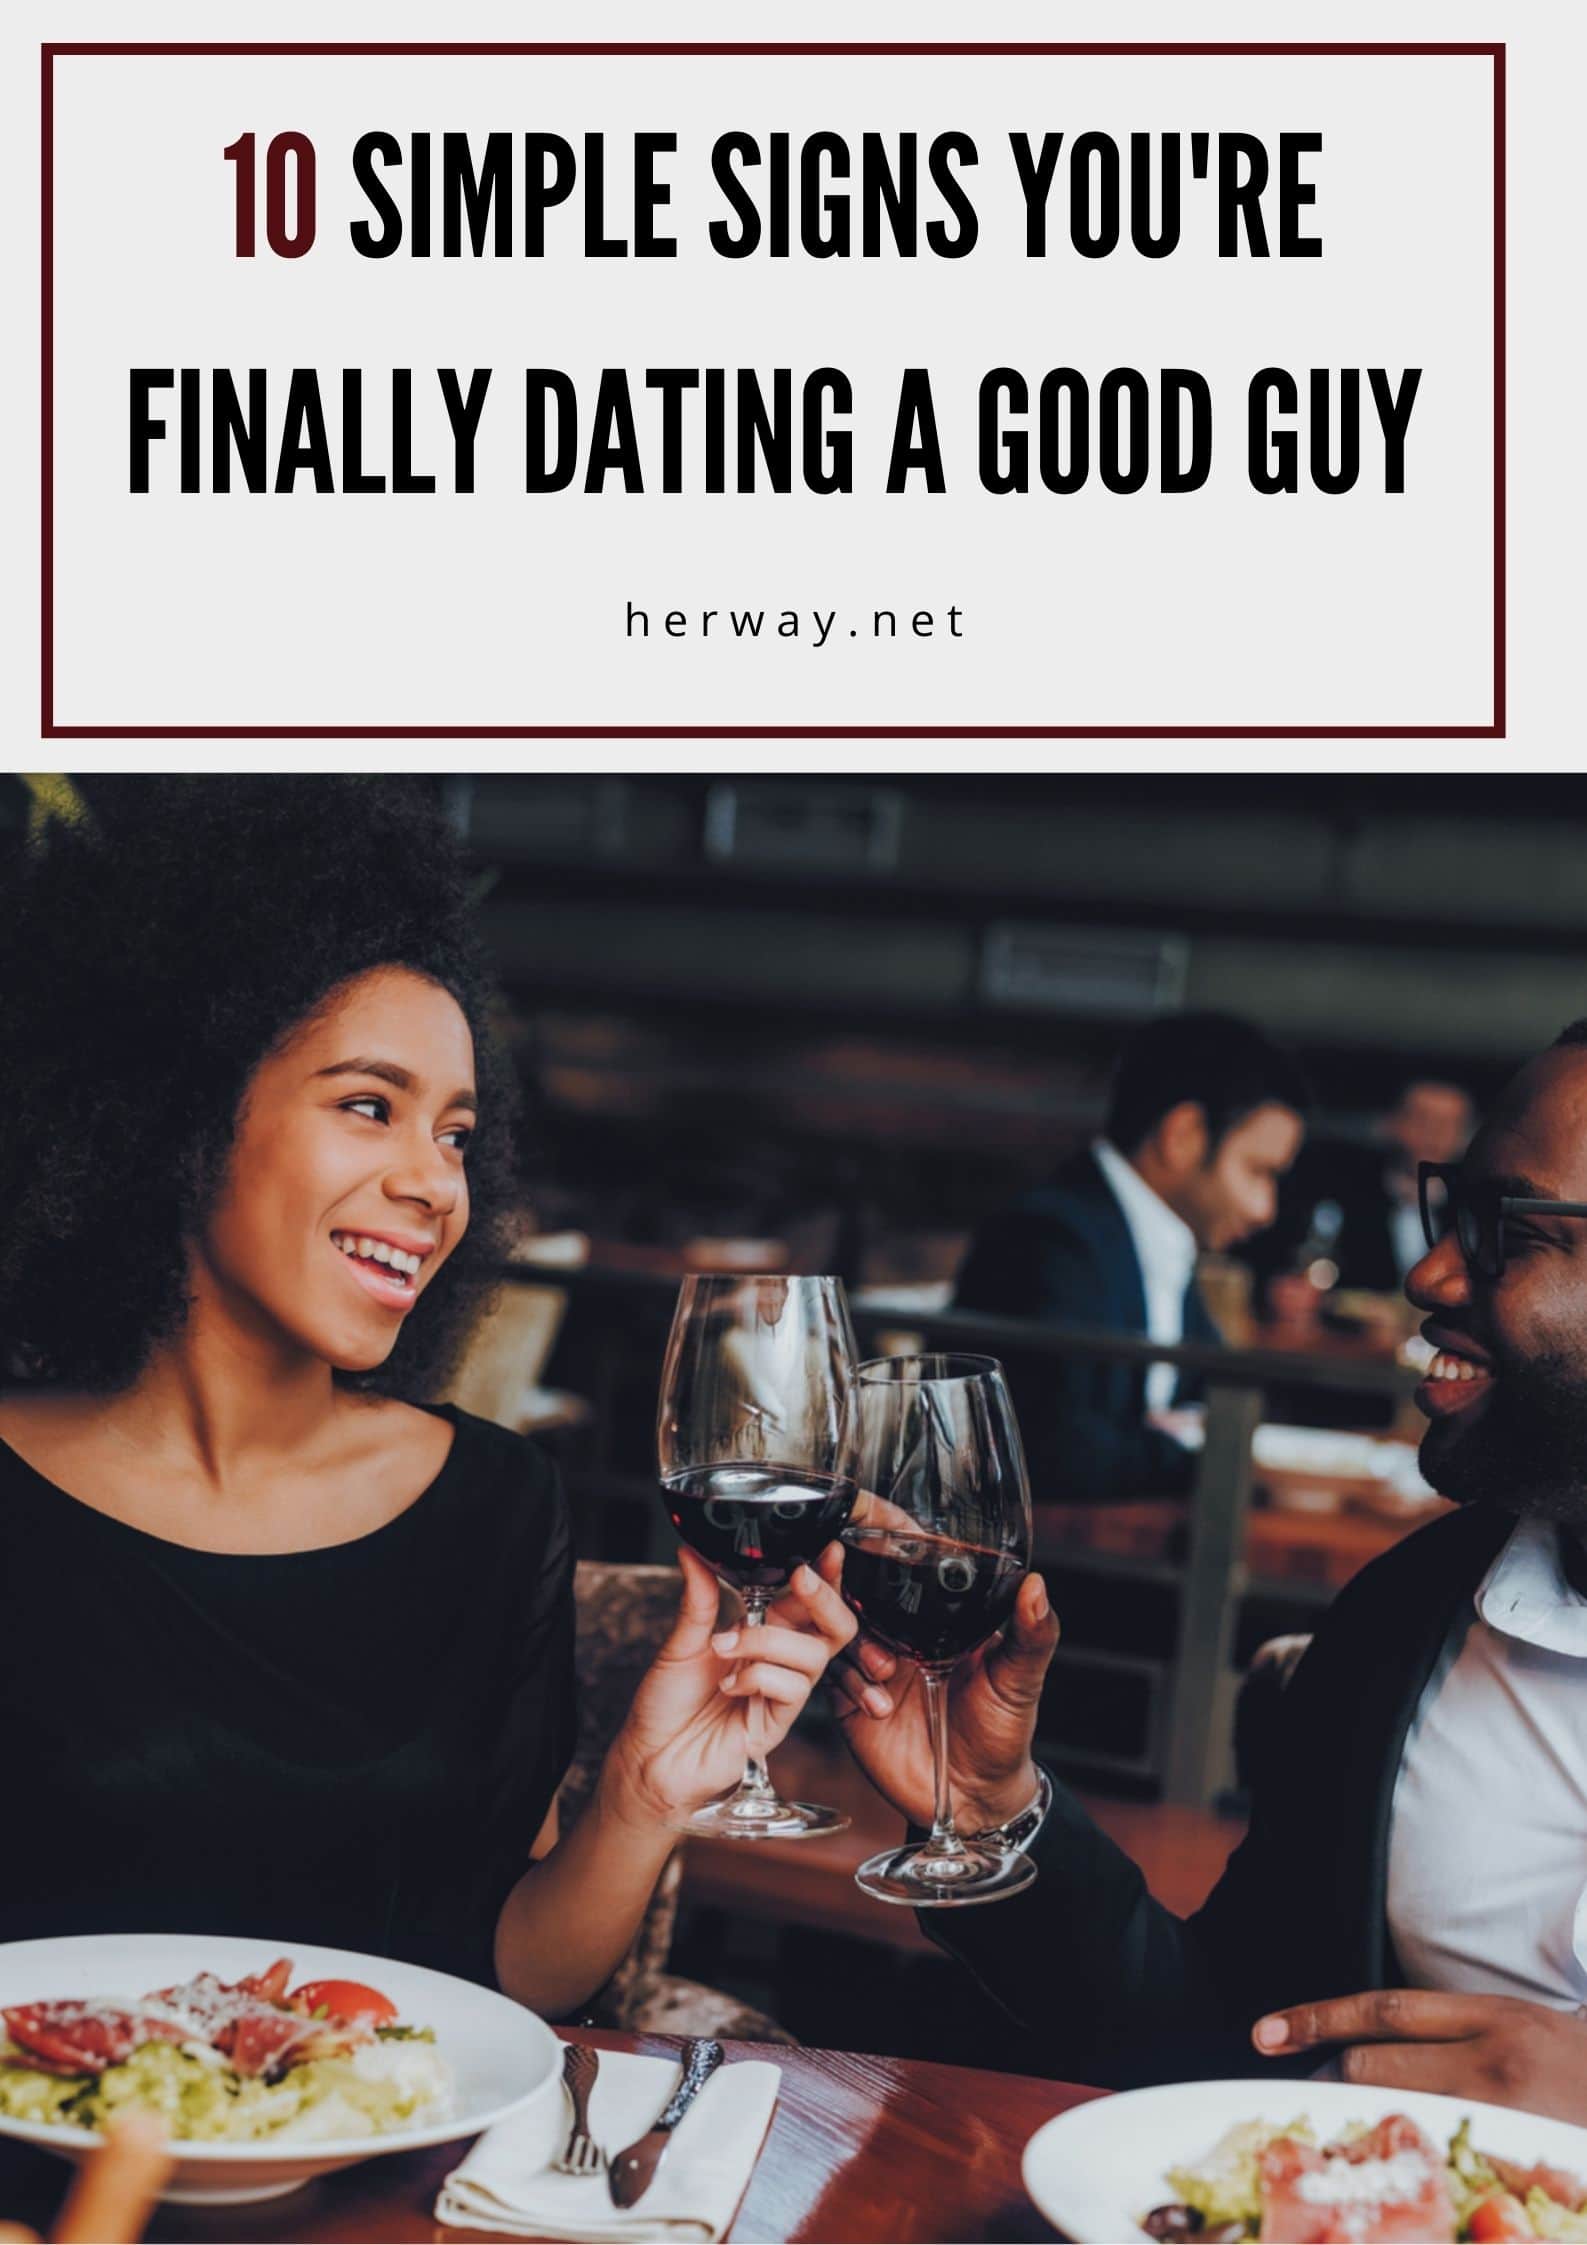 10 Simple Signs You're Finally Dating A Good Guy